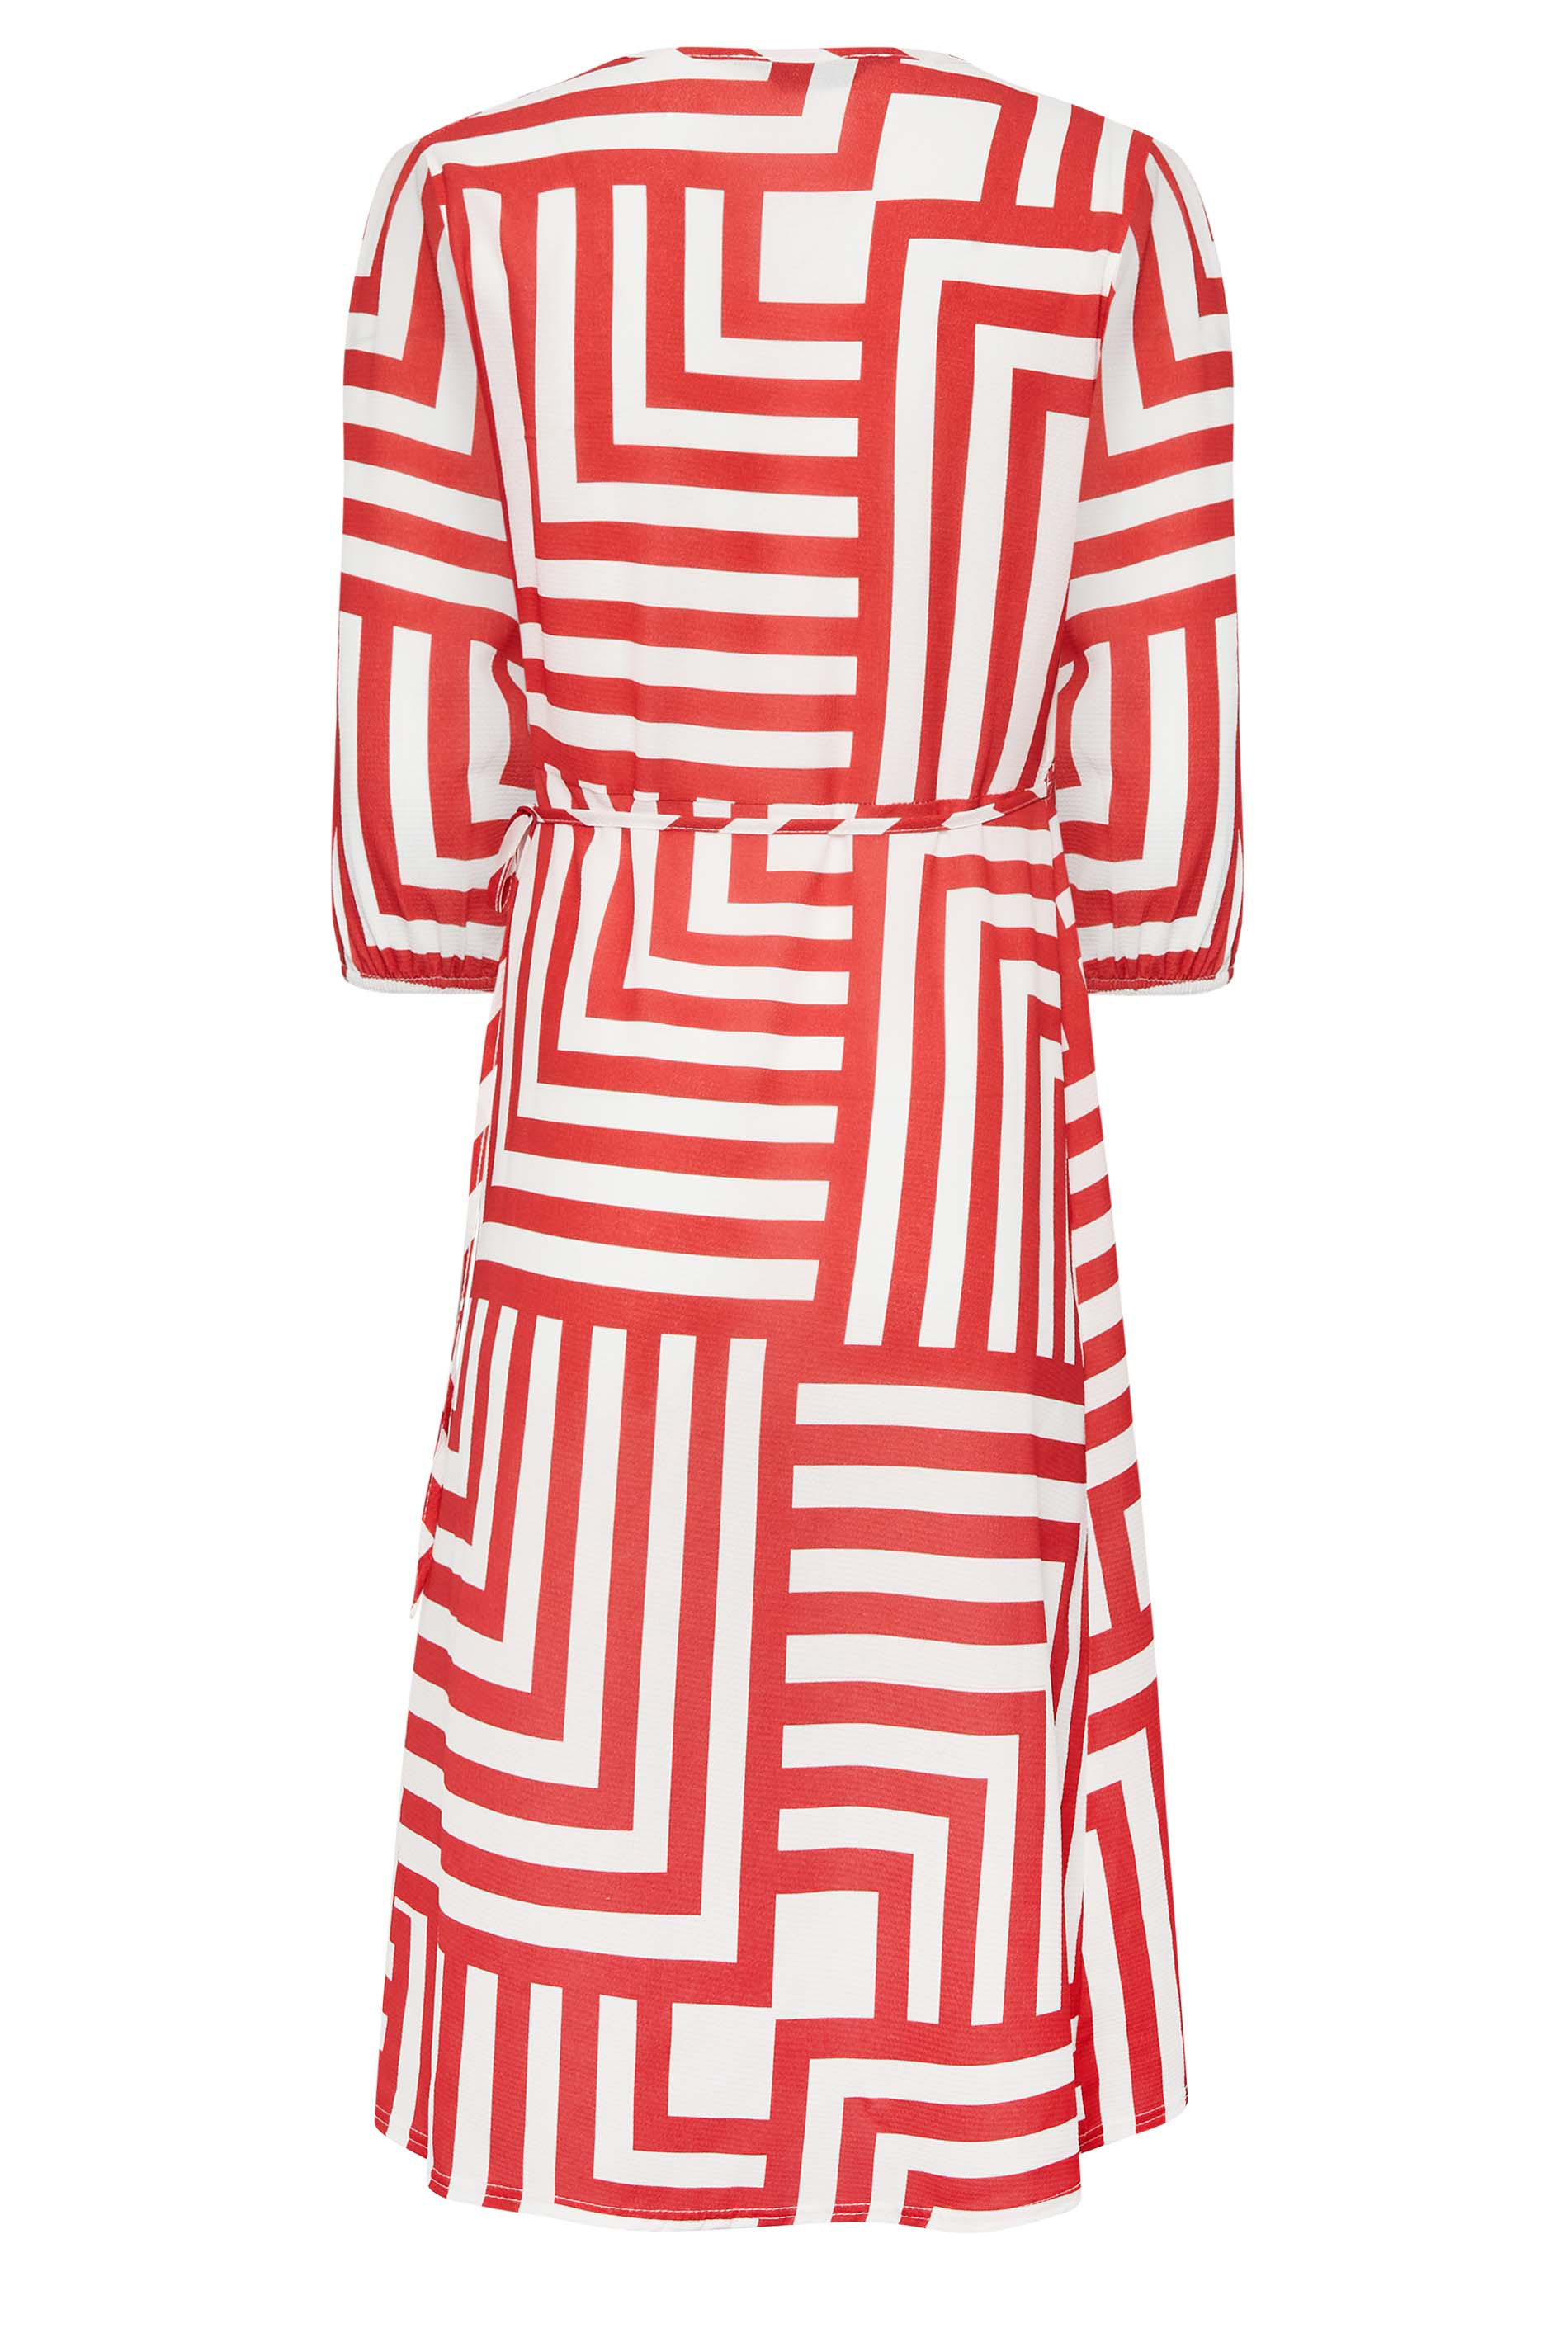 YOURS PETITE Plus Size Red Geometric Print Wrap Dress | Yours Clothing 2